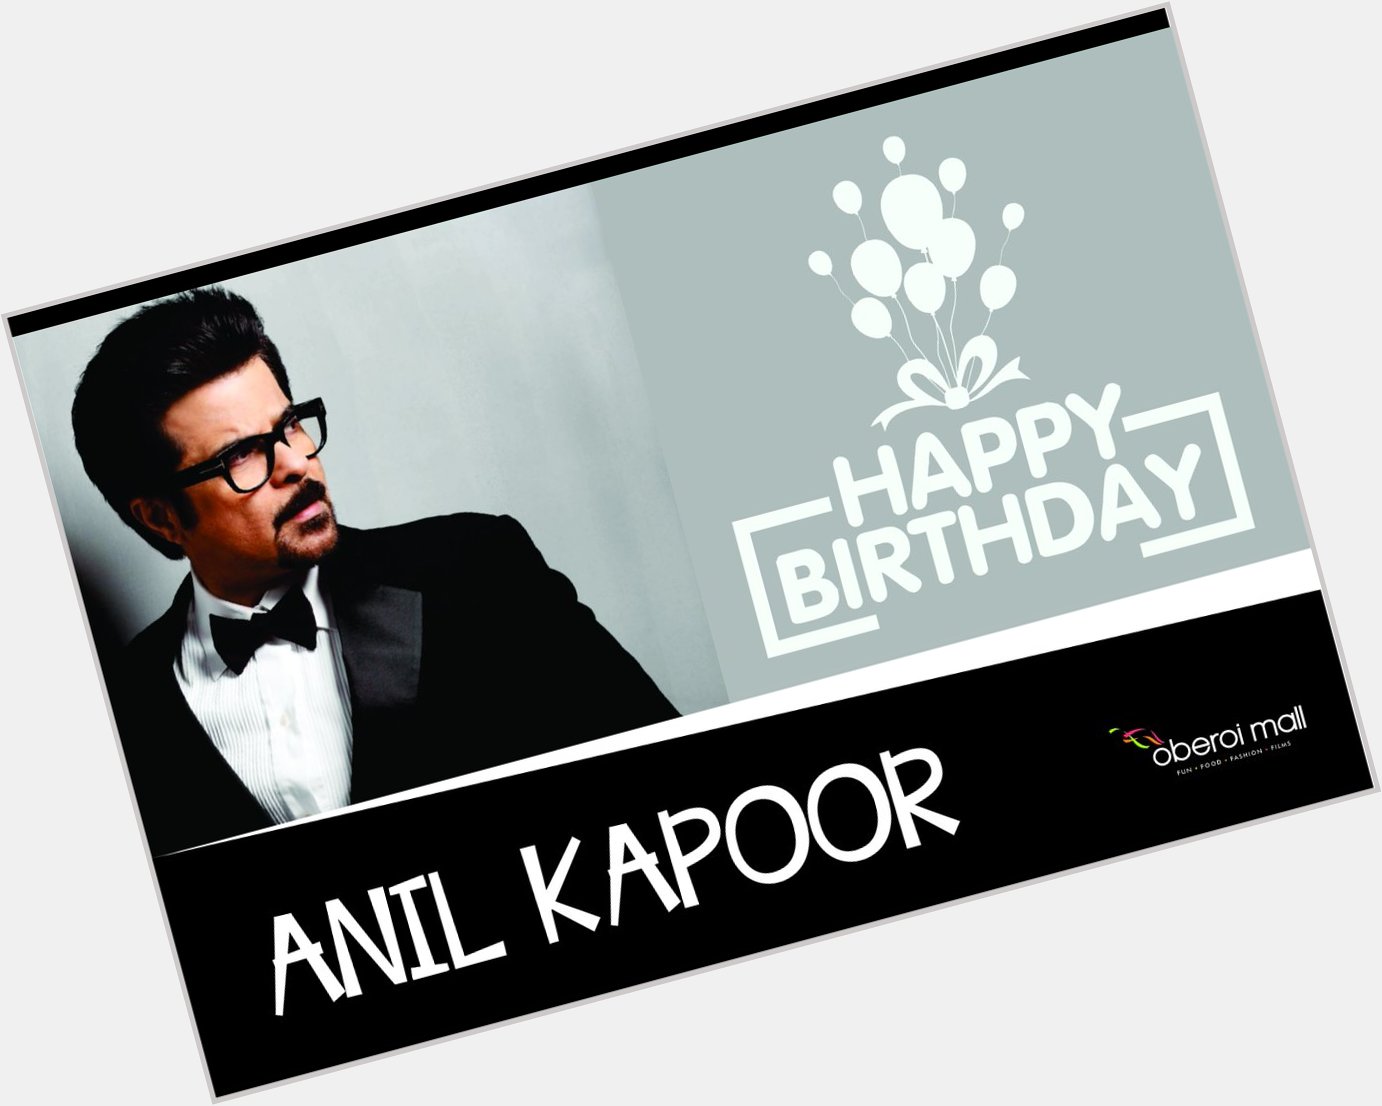 We wish the ever young Anil Kapoor a very Happy Birthday! Have a Jhakaas year ahead! 